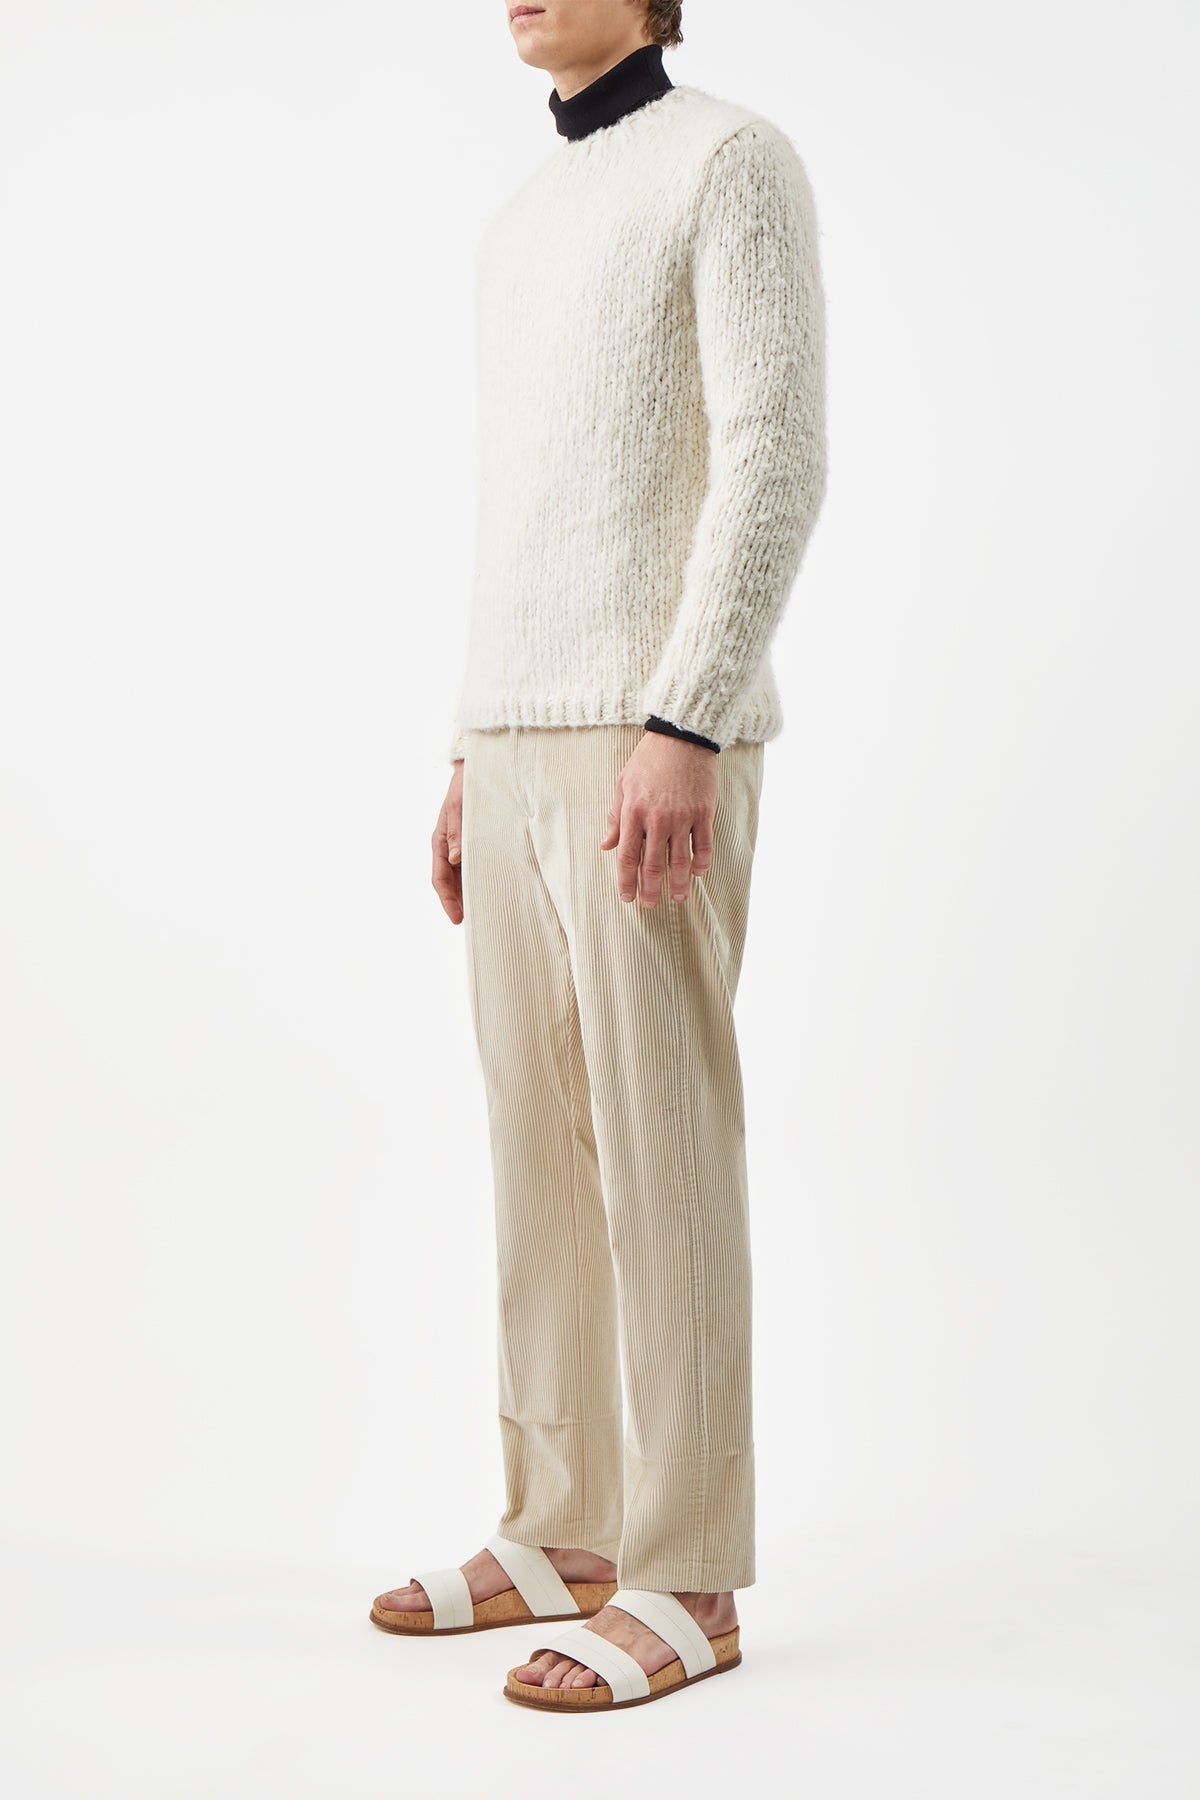 Lawrence Knit Sweater in Ivory Welfat Cashmere - 3